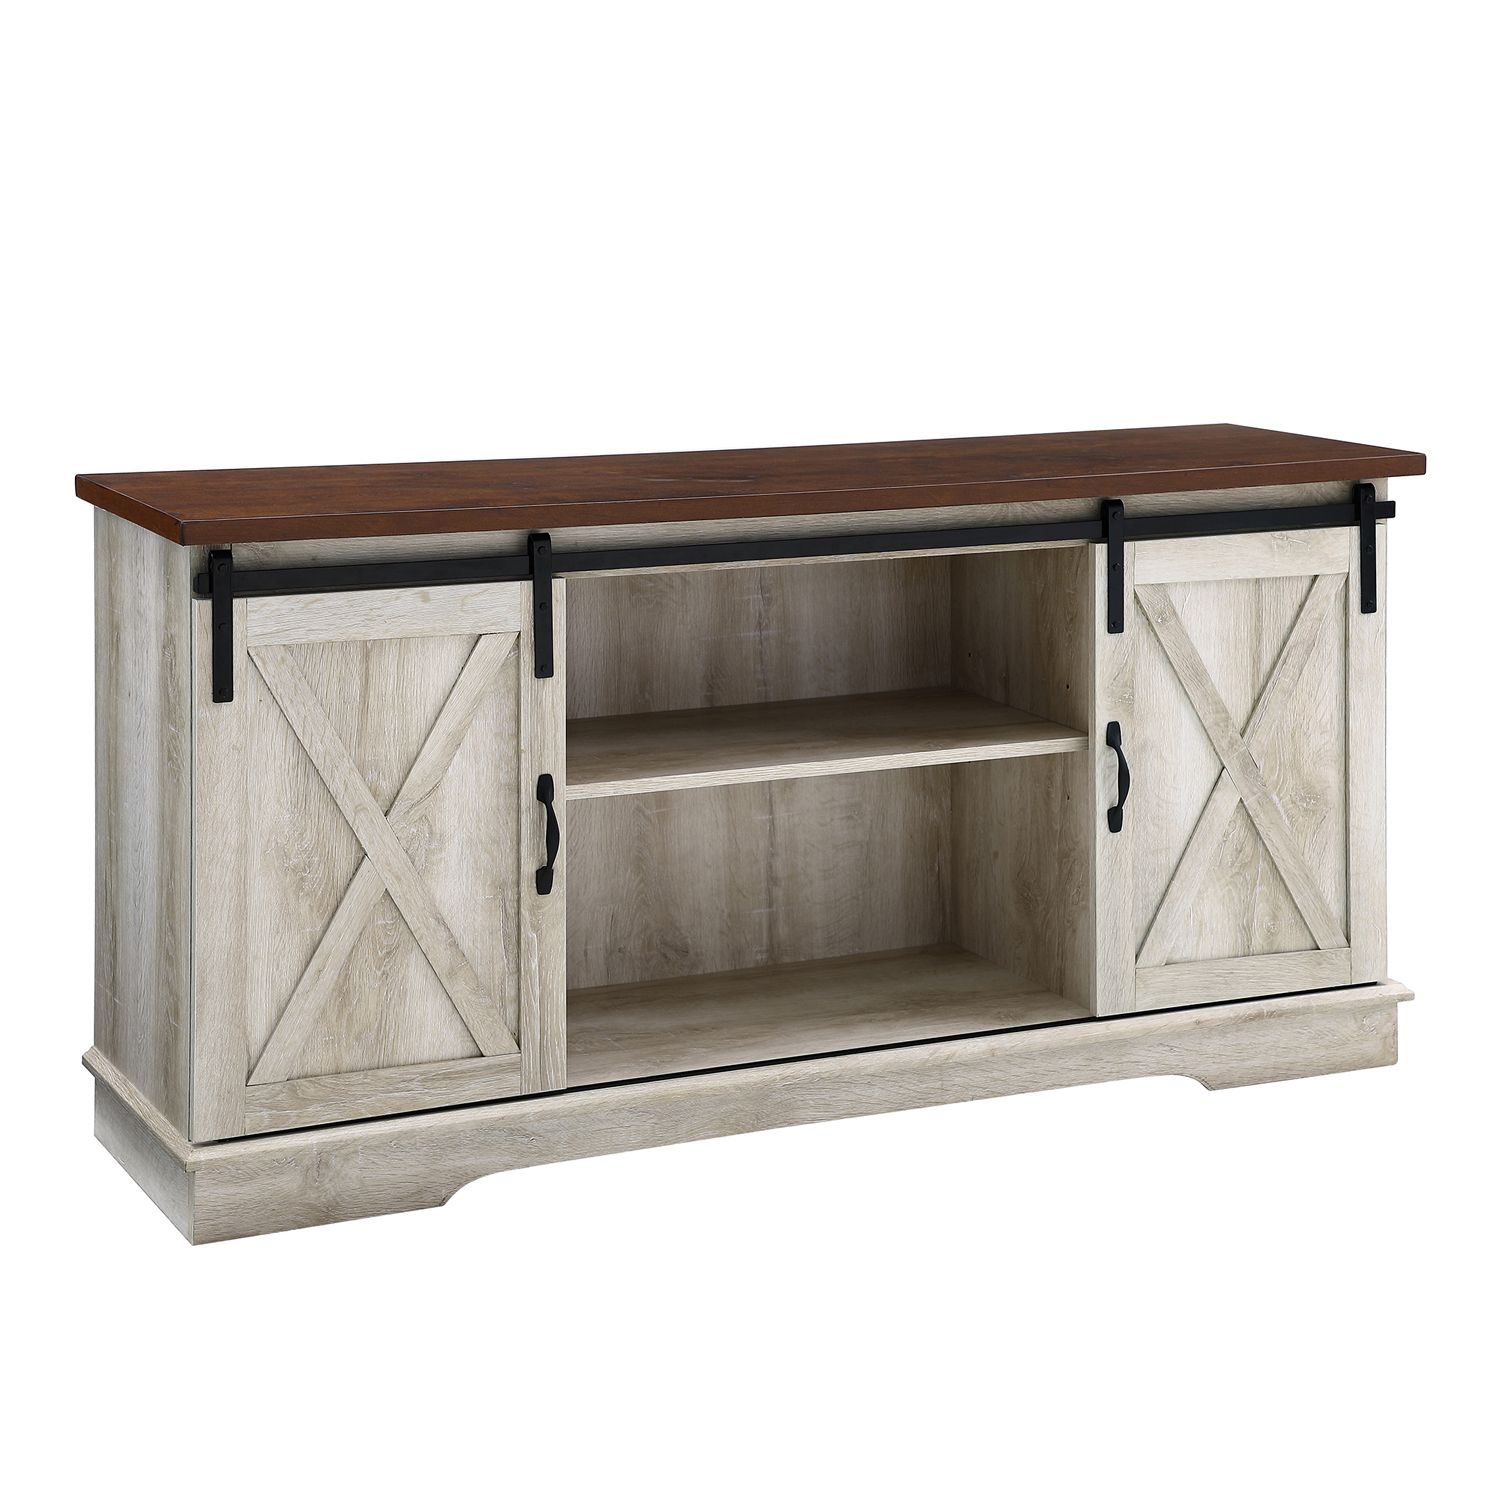 White Oak Farmhouse Sliding Barn Door Tv Stand – Pier1 Imports With Barn Door Media Tv Stands (View 15 of 20)